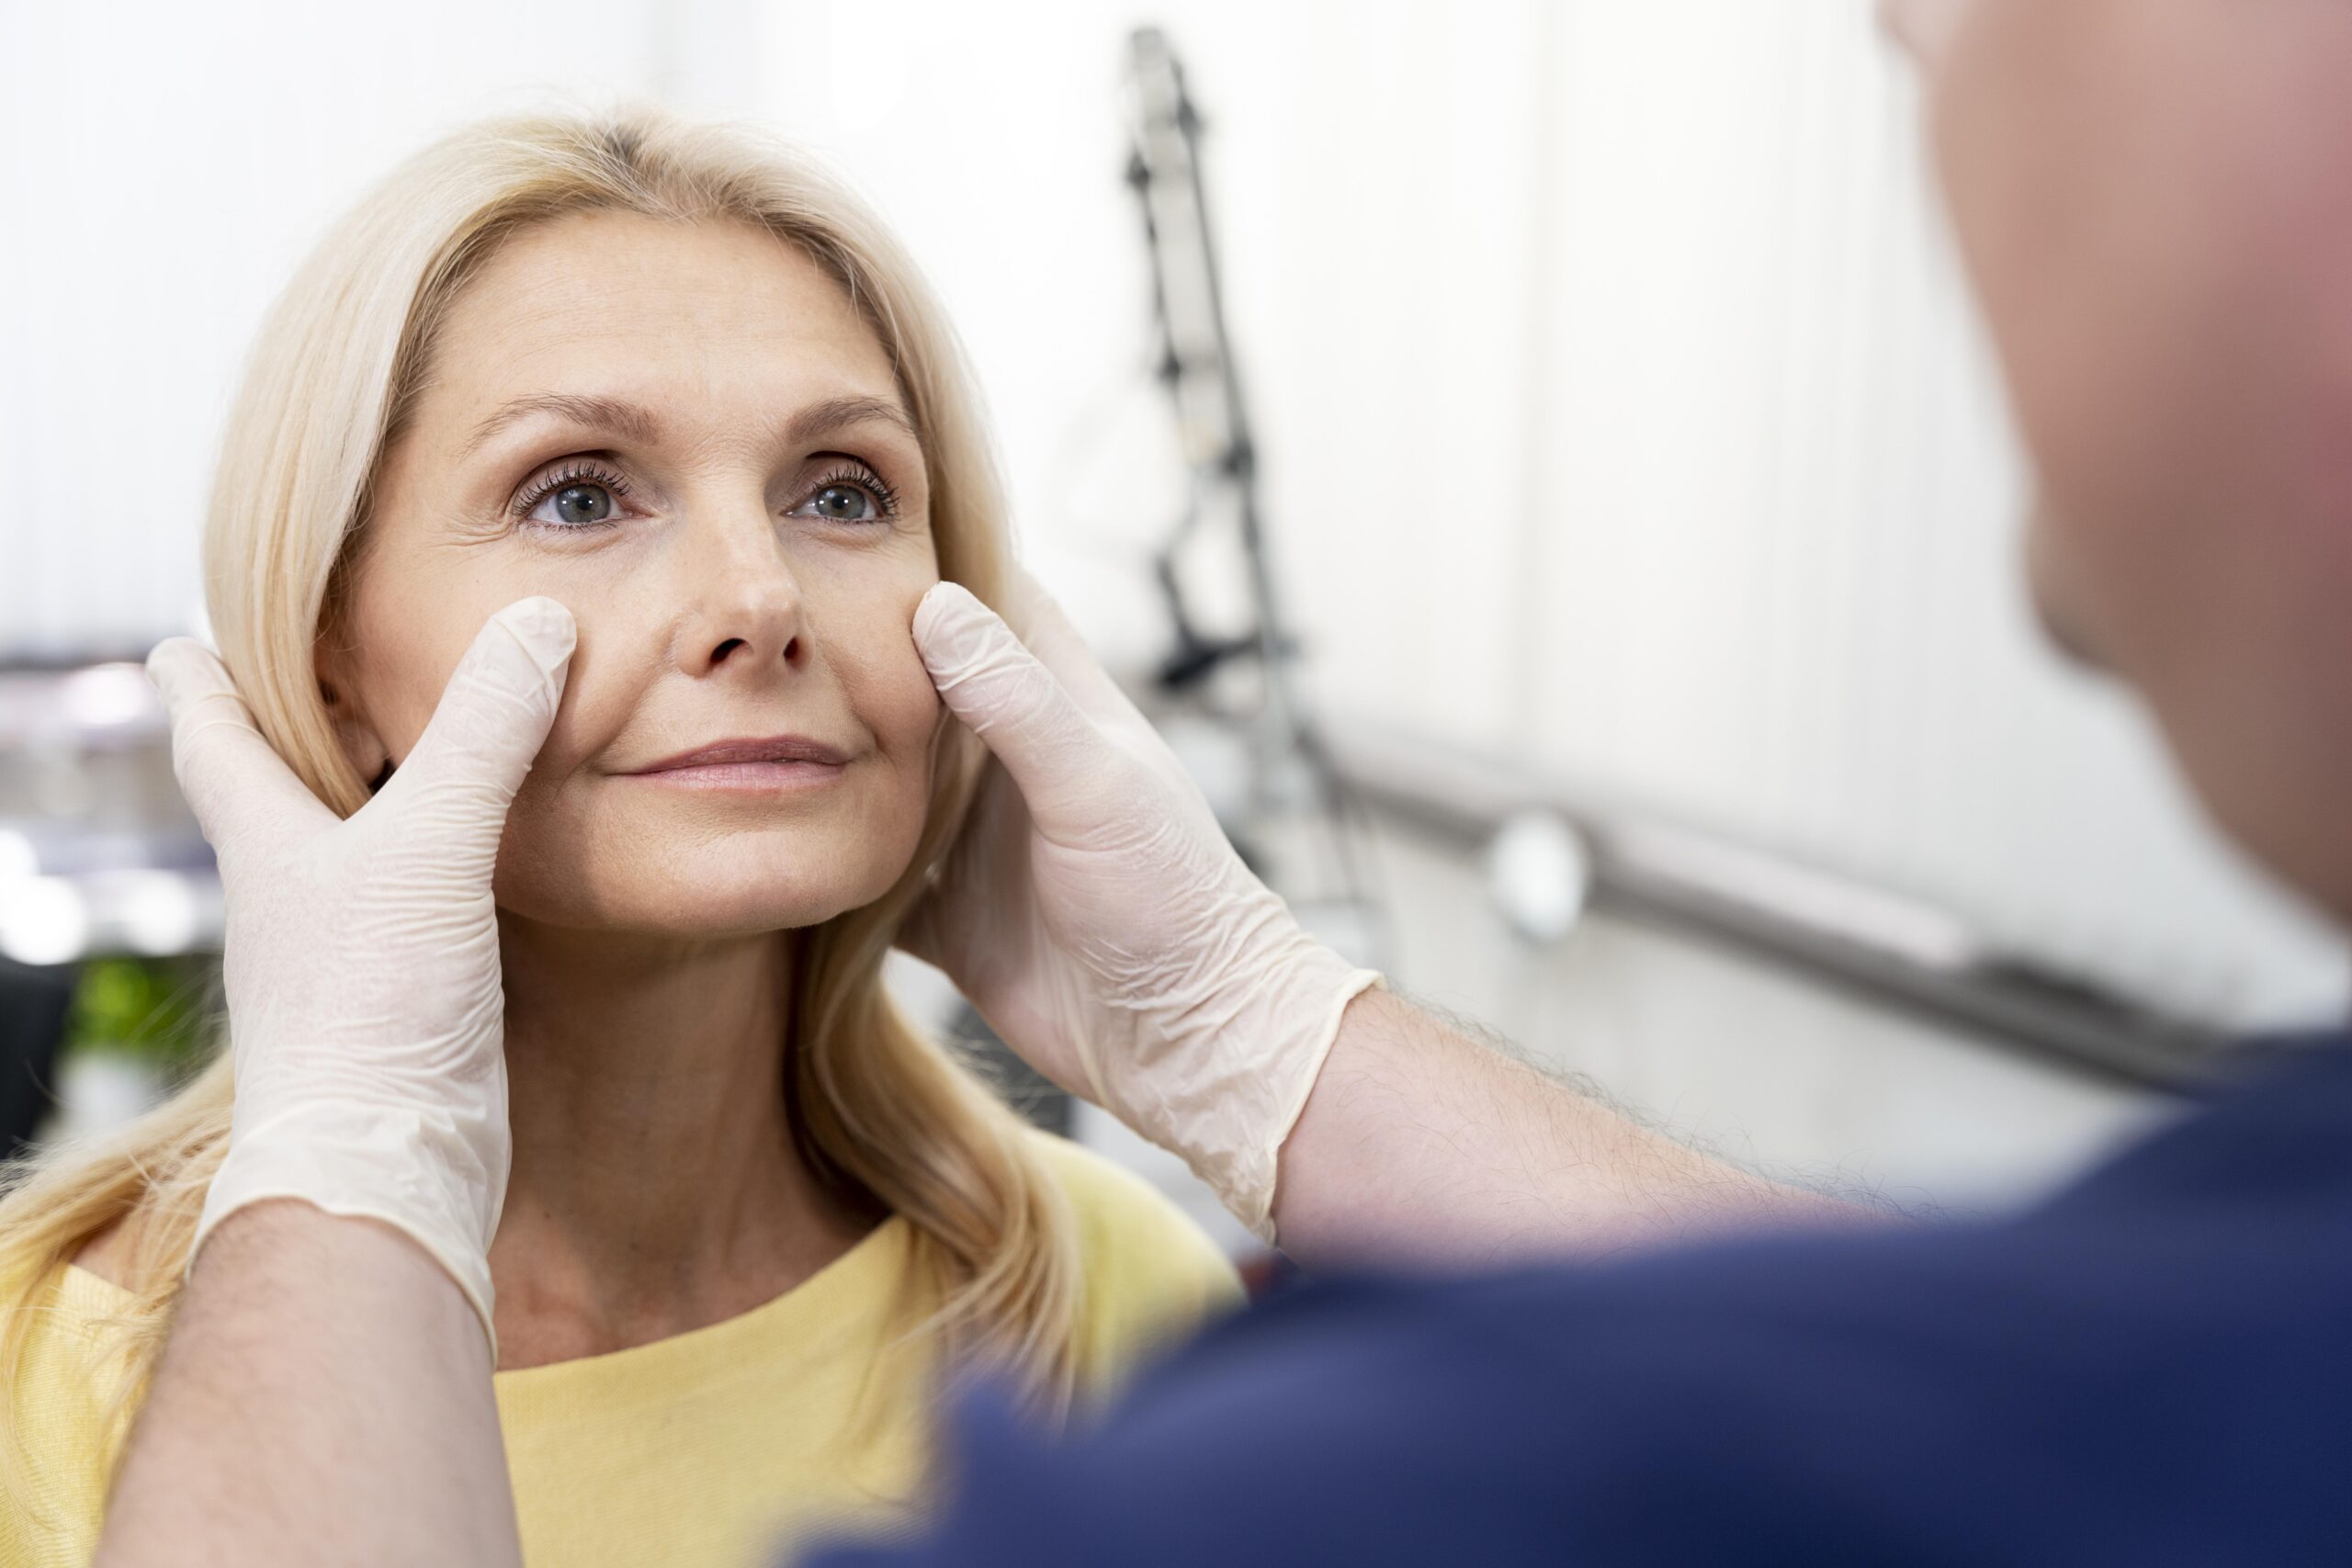 Blepharoplasty vs Thread Lift: Which One is Right for You?